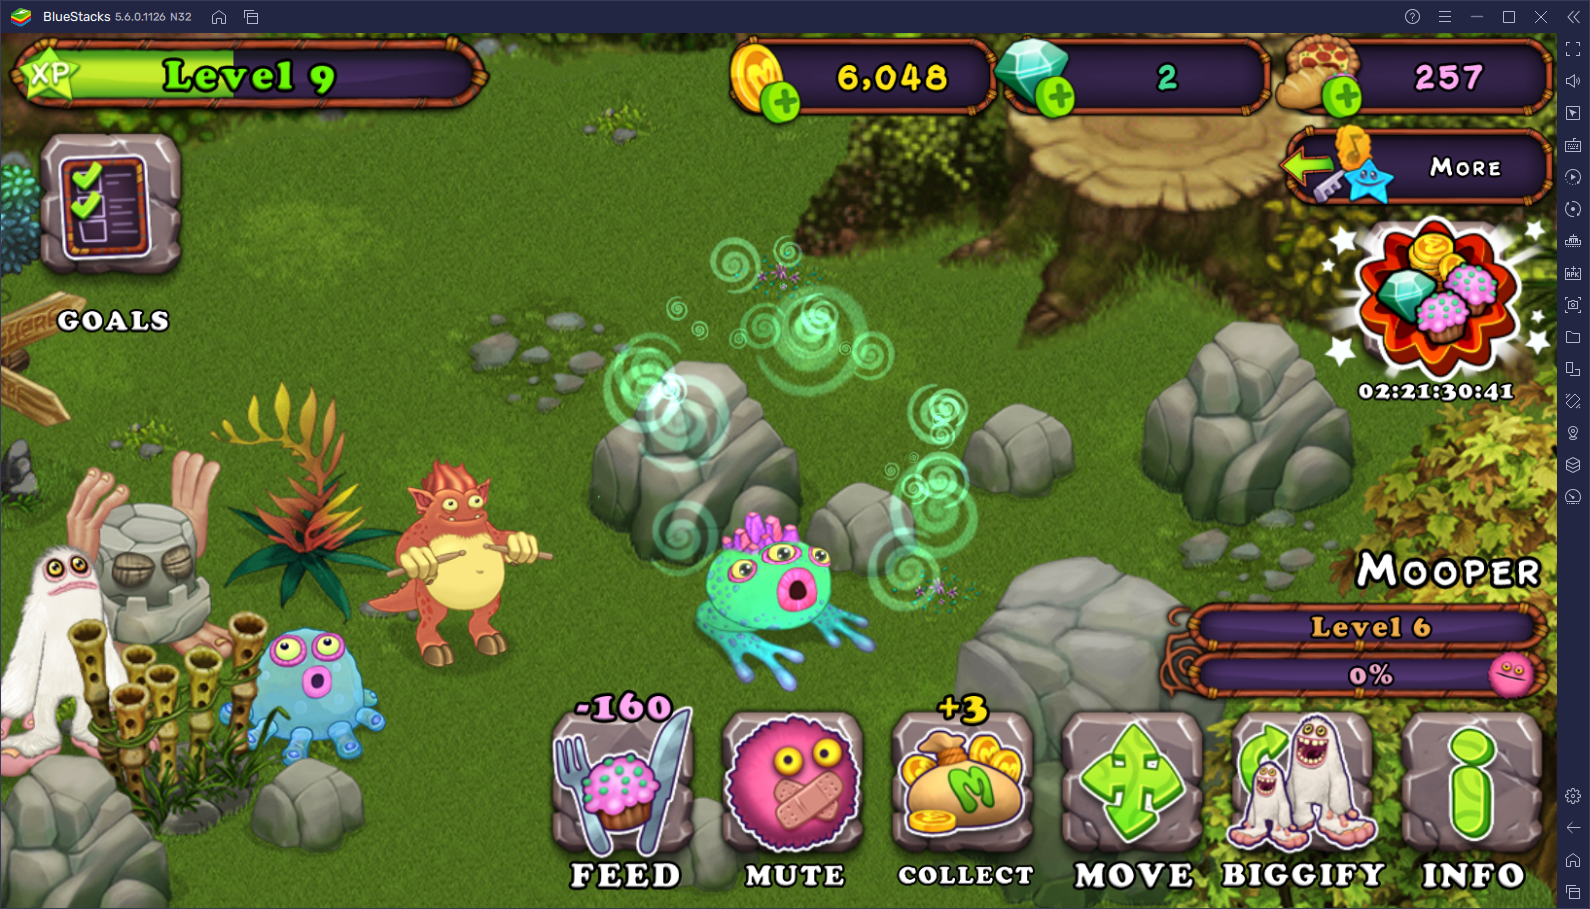 My Singing Monsters Beginner’s Guide on How To Obtain and Breed Monsters, And Grow Your Islands